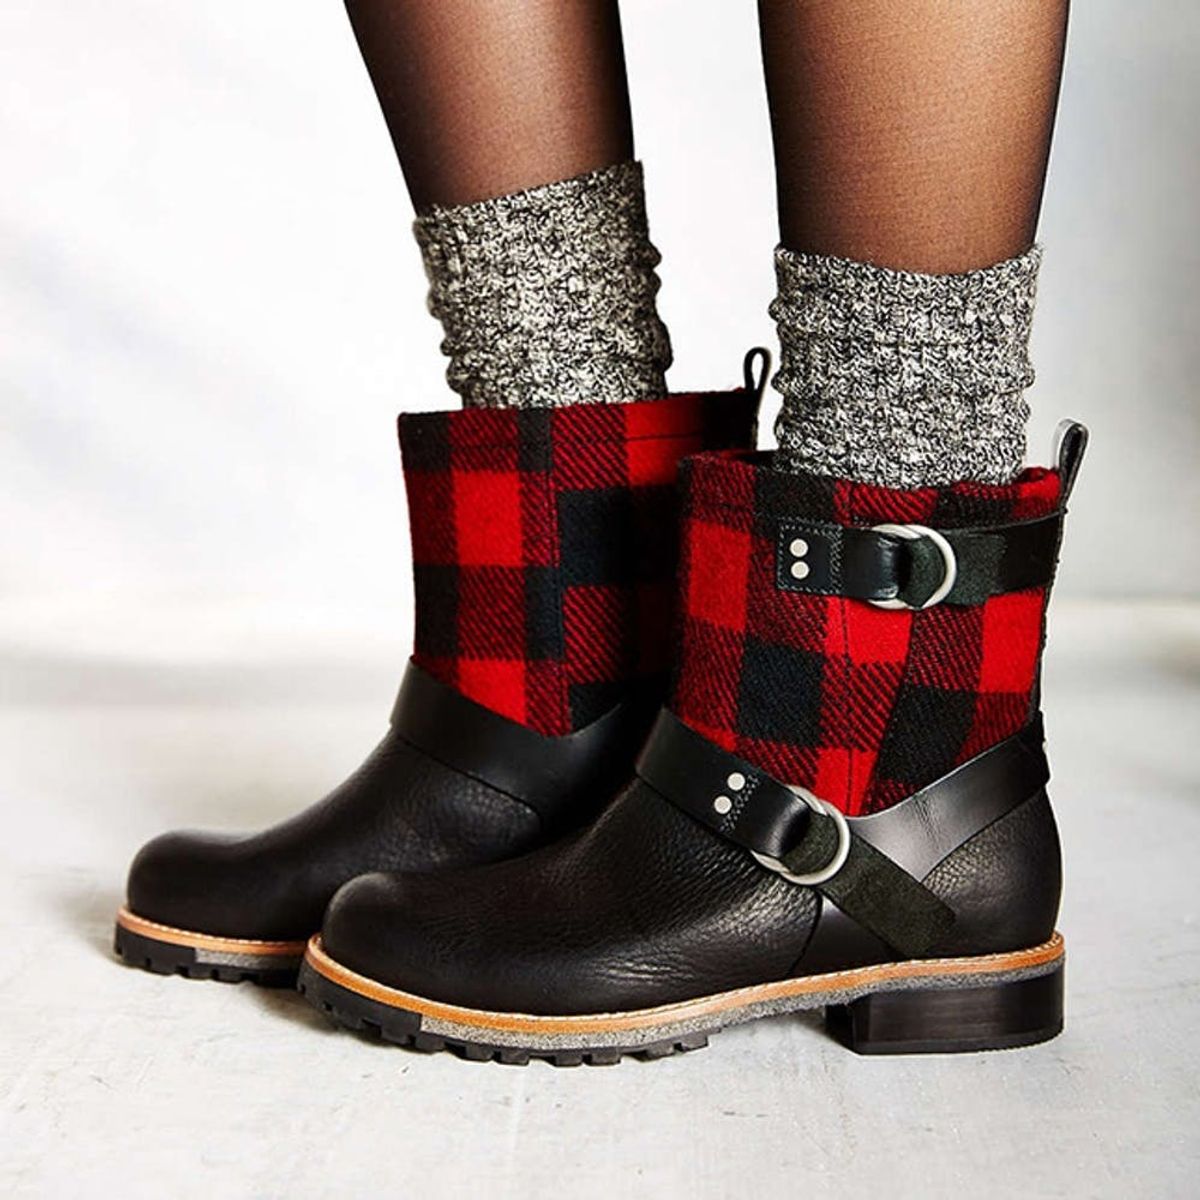 Beat Winter Like a Boss With These 15 Boots